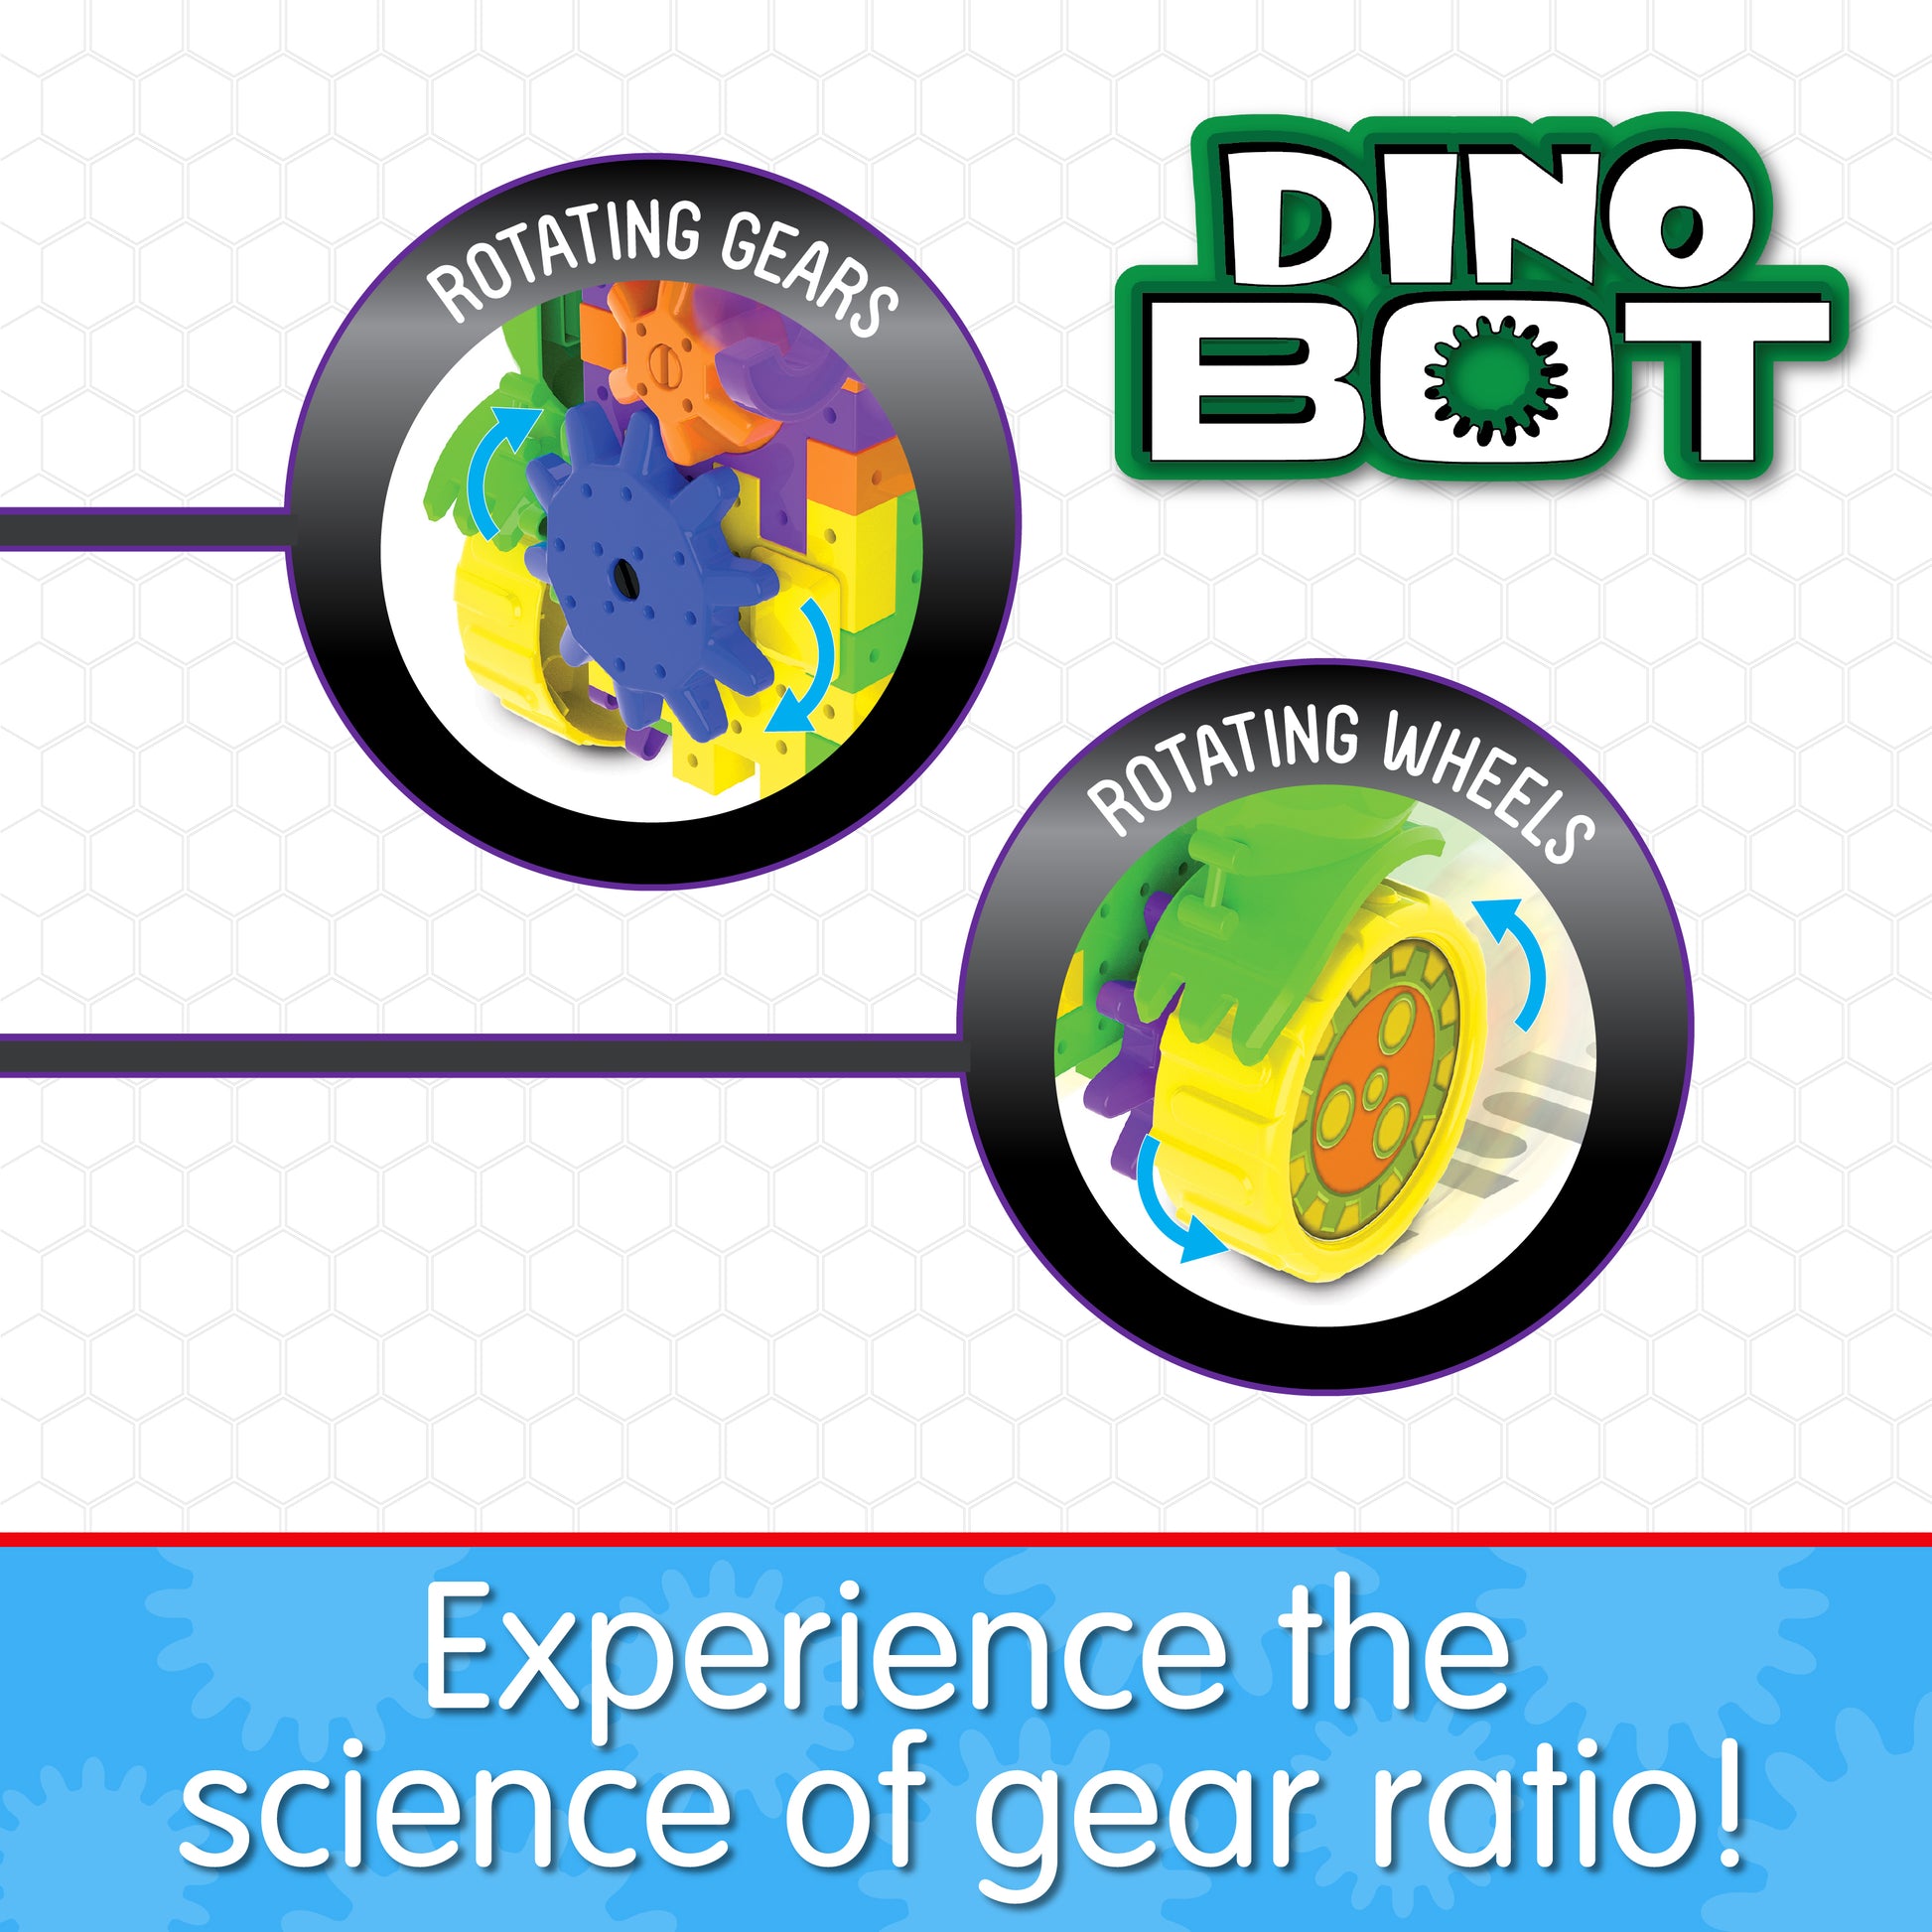 Infographic about Dino Bot's features that says, "Experience the science of gear ratio!"